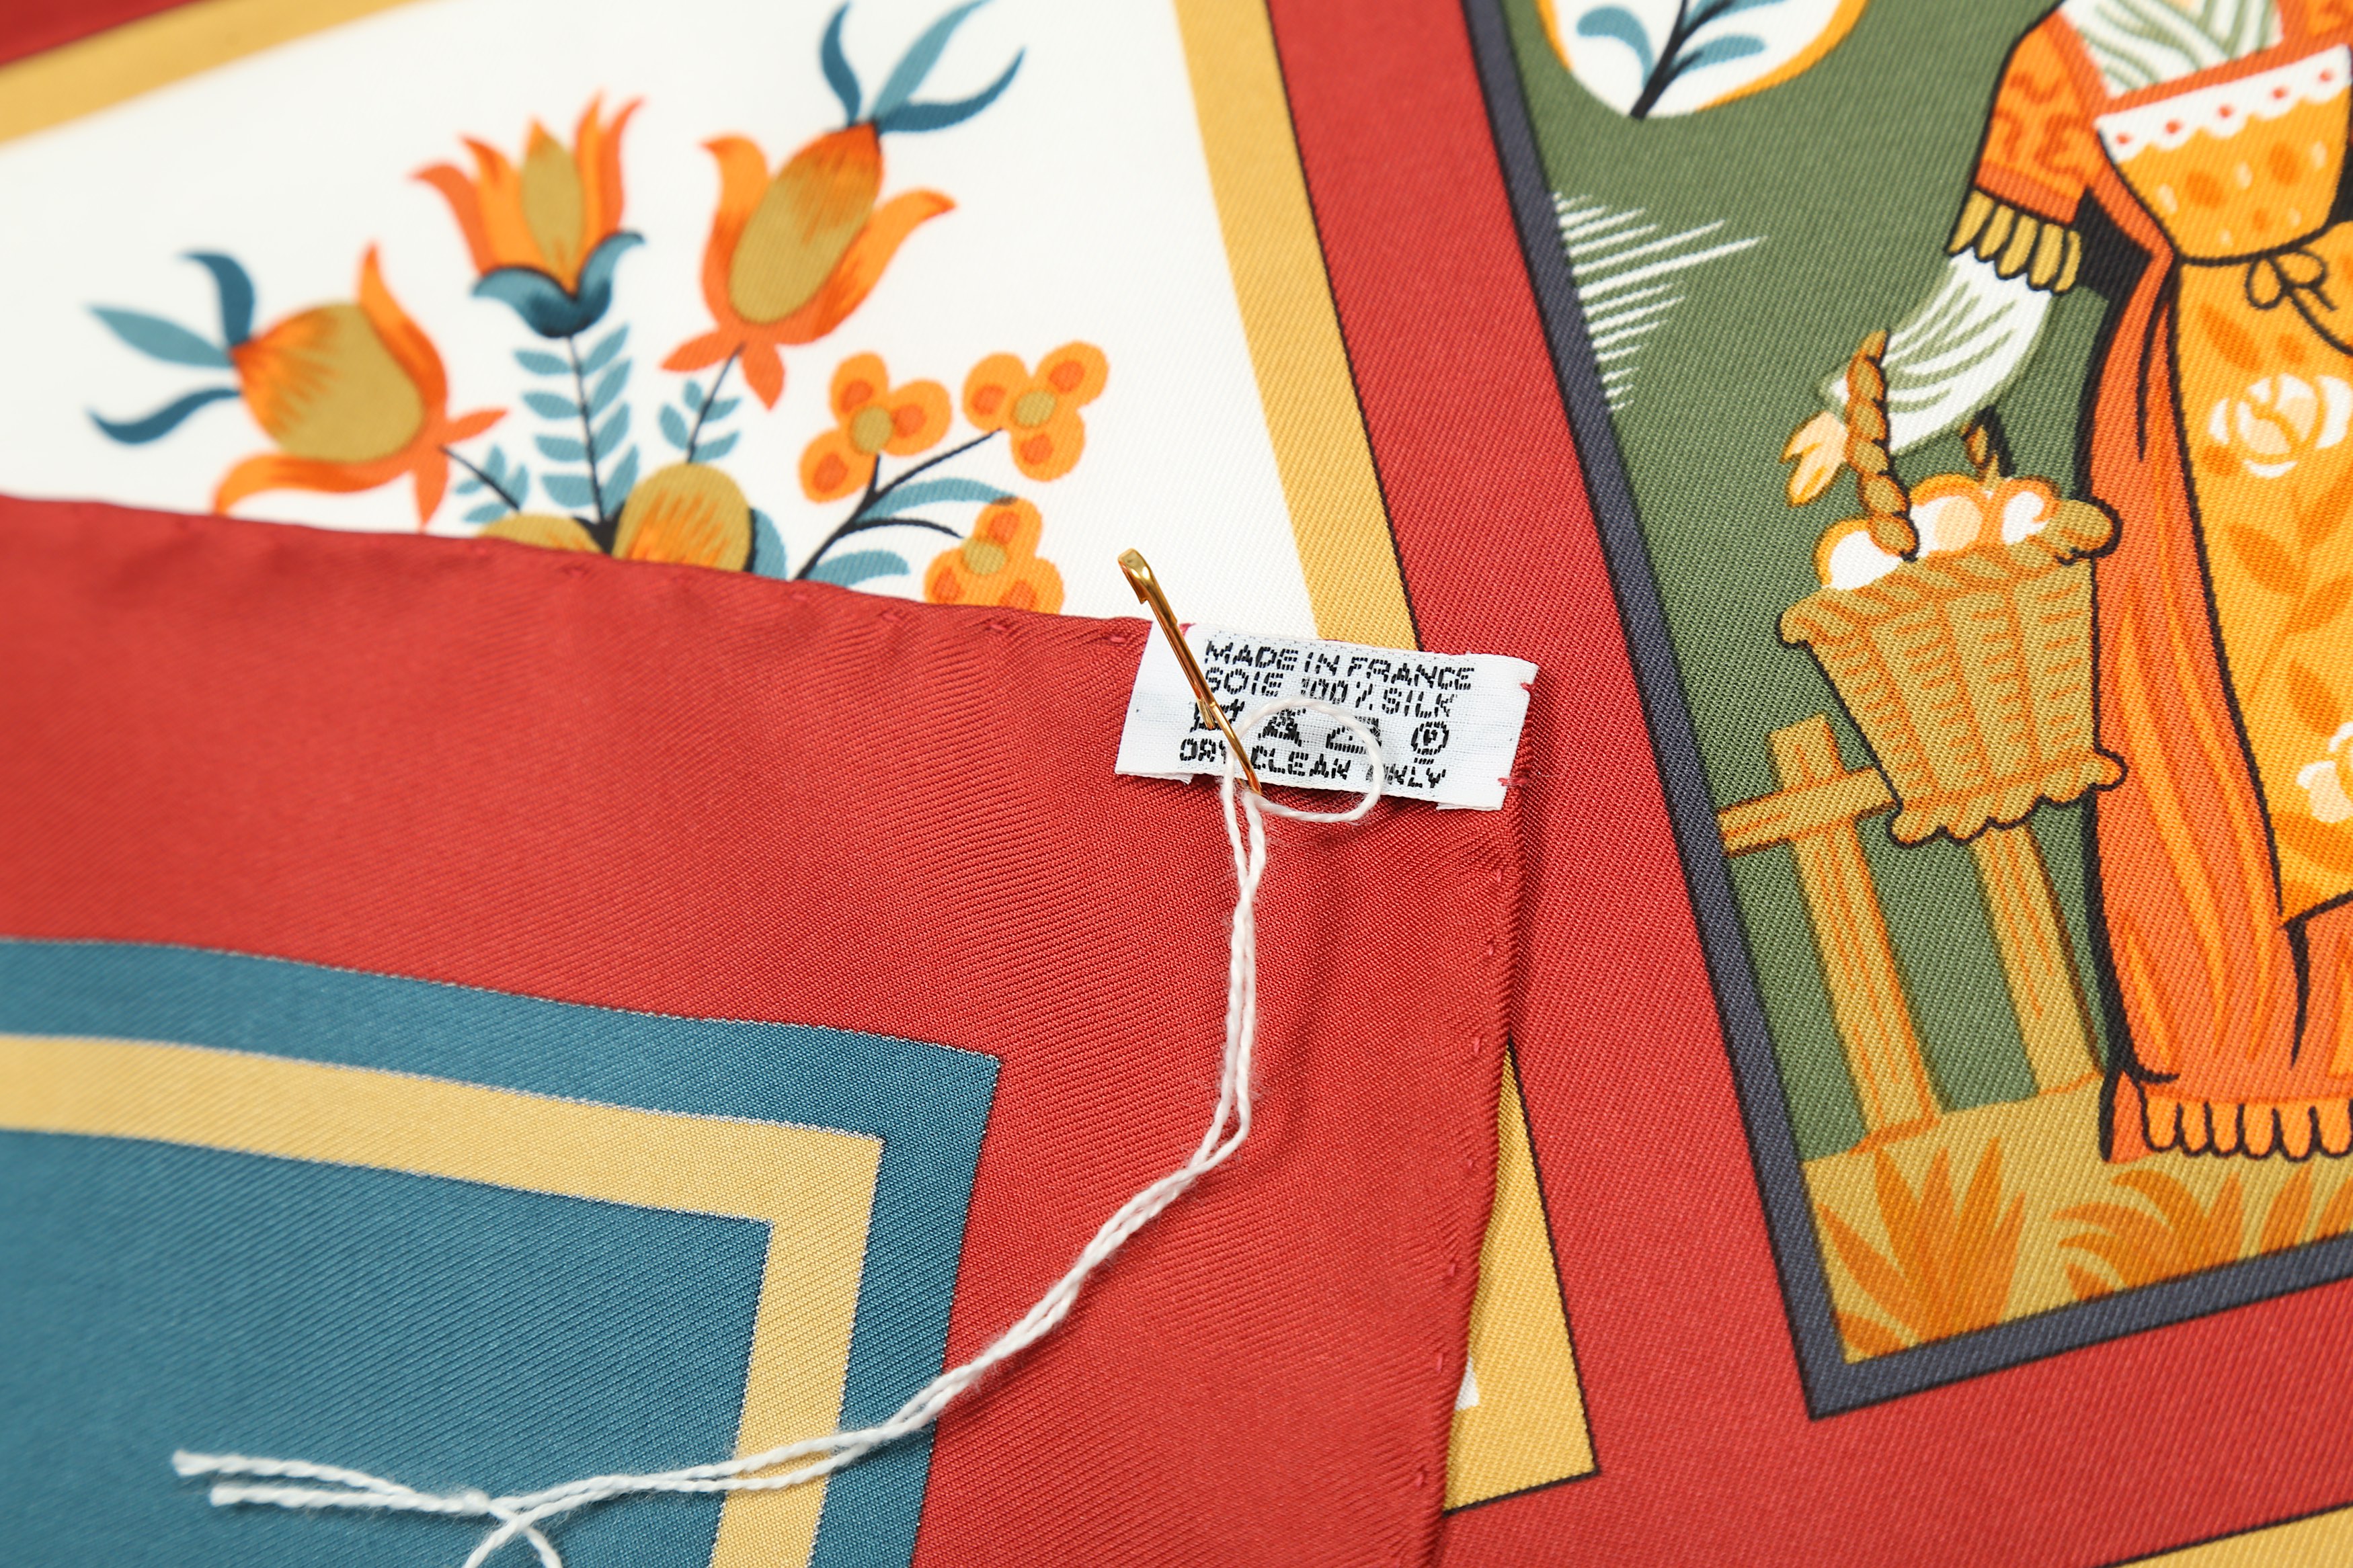 Hermes 'Imagerie' Silk Scarf - Image 3 of 4